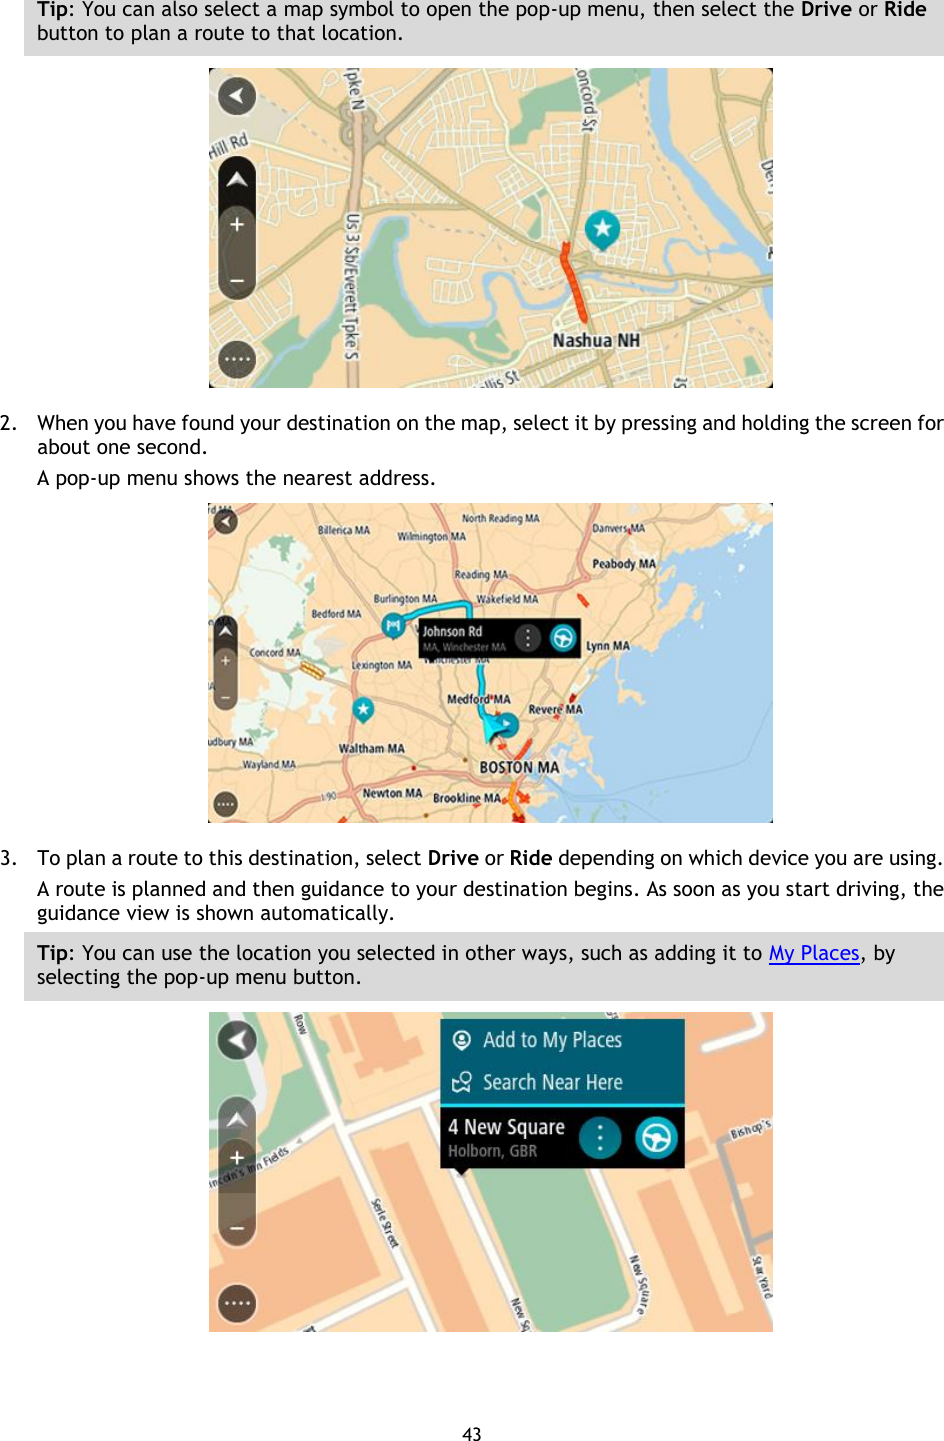 43    Tip: You can also select a map symbol to open the pop-up menu, then select the Drive or Ride button to plan a route to that location.  2. When you have found your destination on the map, select it by pressing and holding the screen for about one second.   A pop-up menu shows the nearest address.  3. To plan a route to this destination, select Drive or Ride depending on which device you are using. A route is planned and then guidance to your destination begins. As soon as you start driving, the guidance view is shown automatically. Tip: You can use the location you selected in other ways, such as adding it to My Places, by selecting the pop-up menu button.  